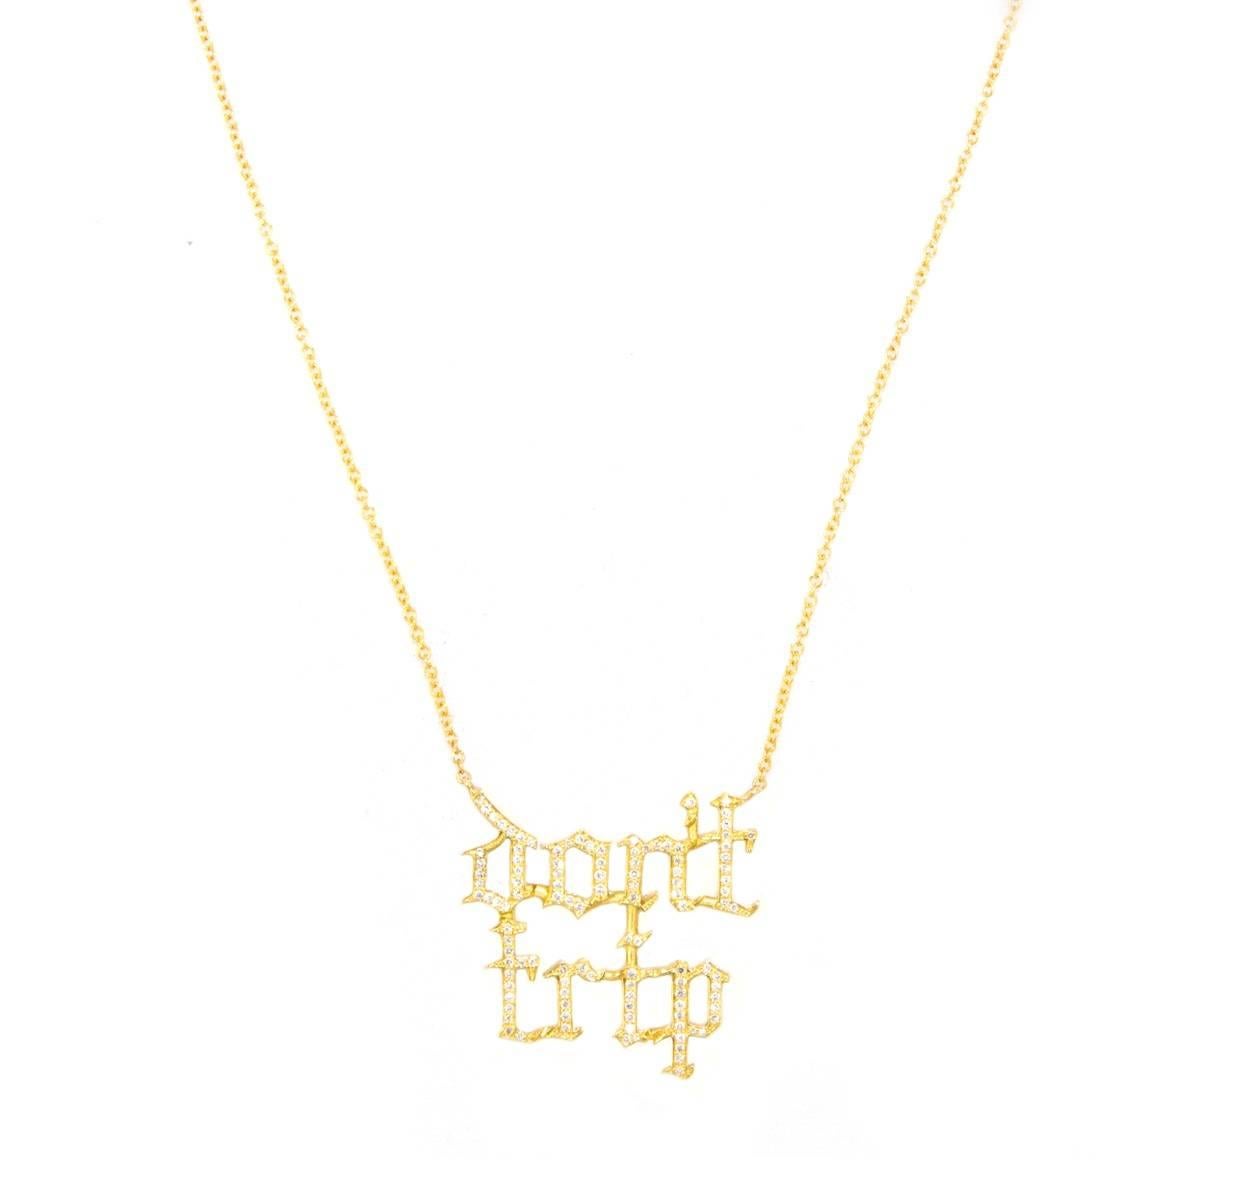 Huckleberry Ltd 18k yellow gold and white diamond Don't Trip necklace For Sale